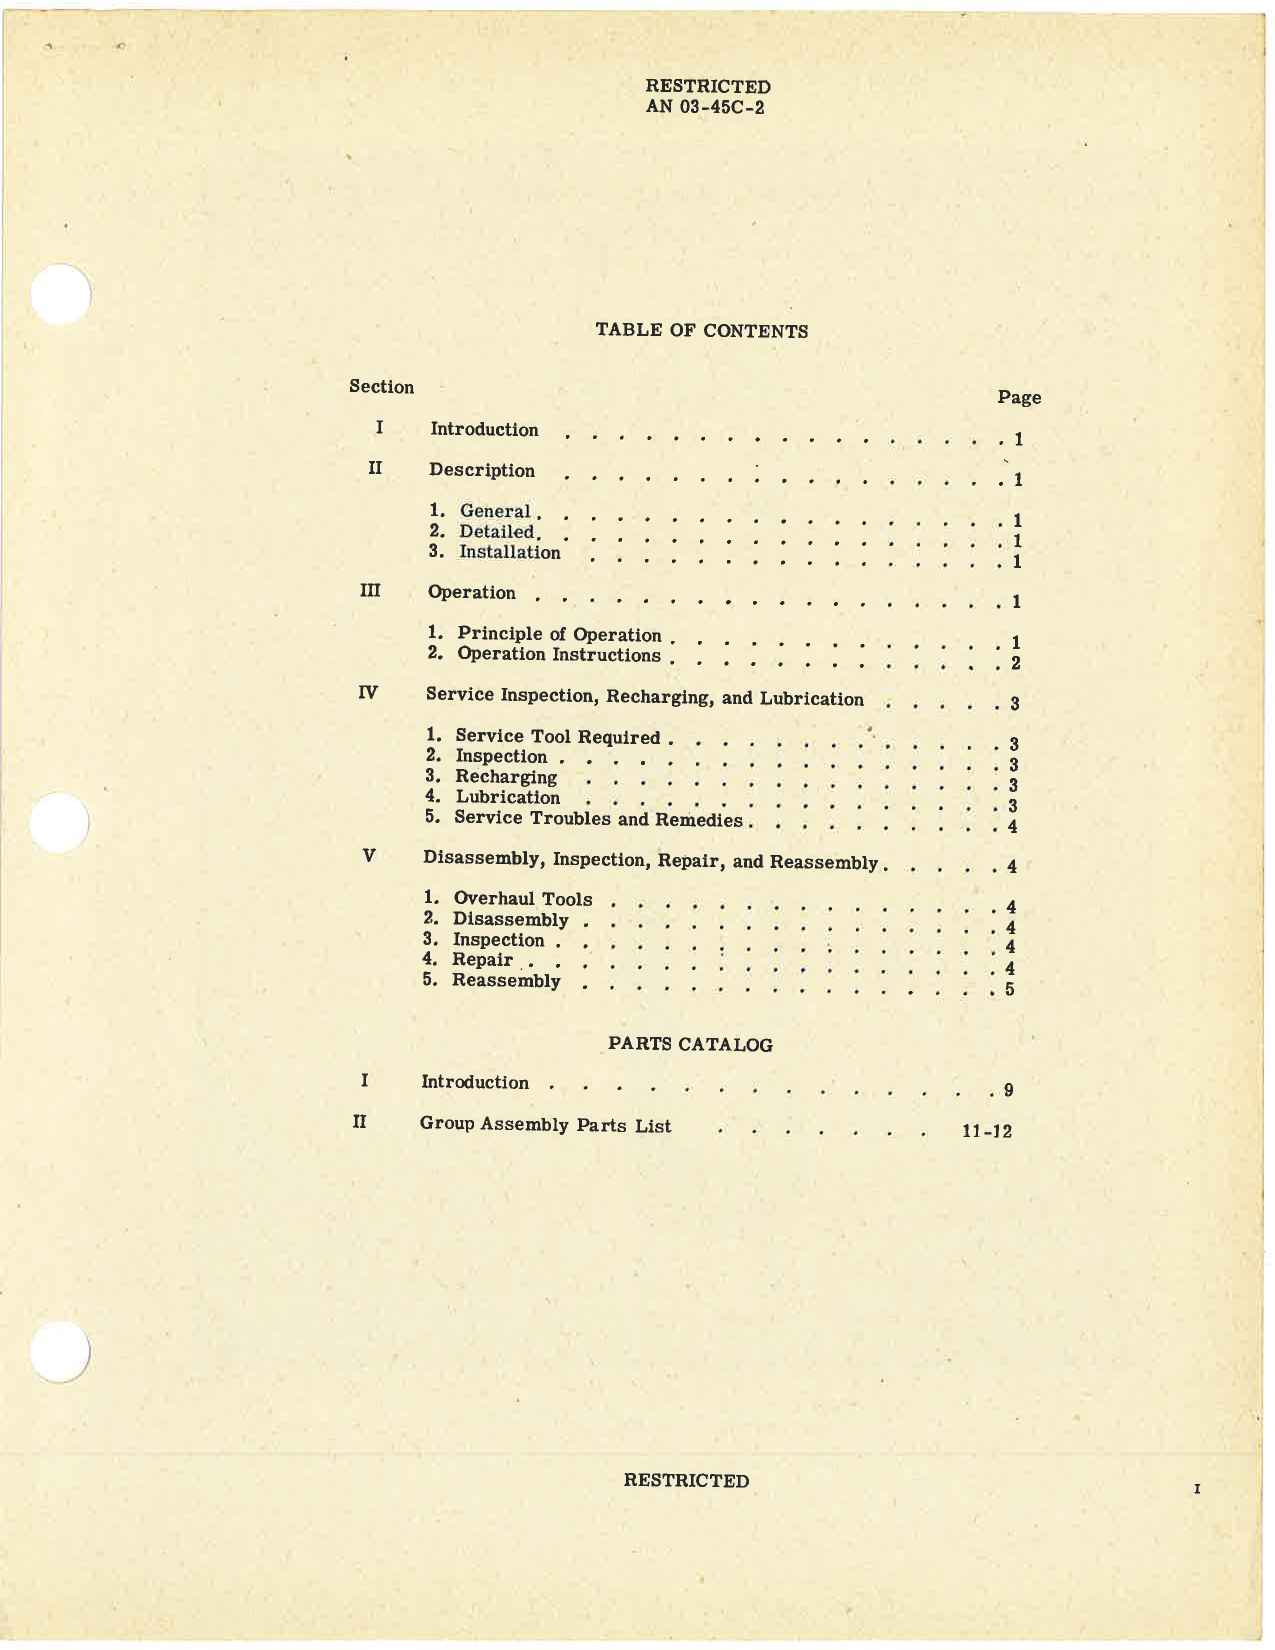 Sample page 3 from AirCorps Library document: Handbook of Instructions with Parts Catalog for A-17 Portable Fire Extinguisher